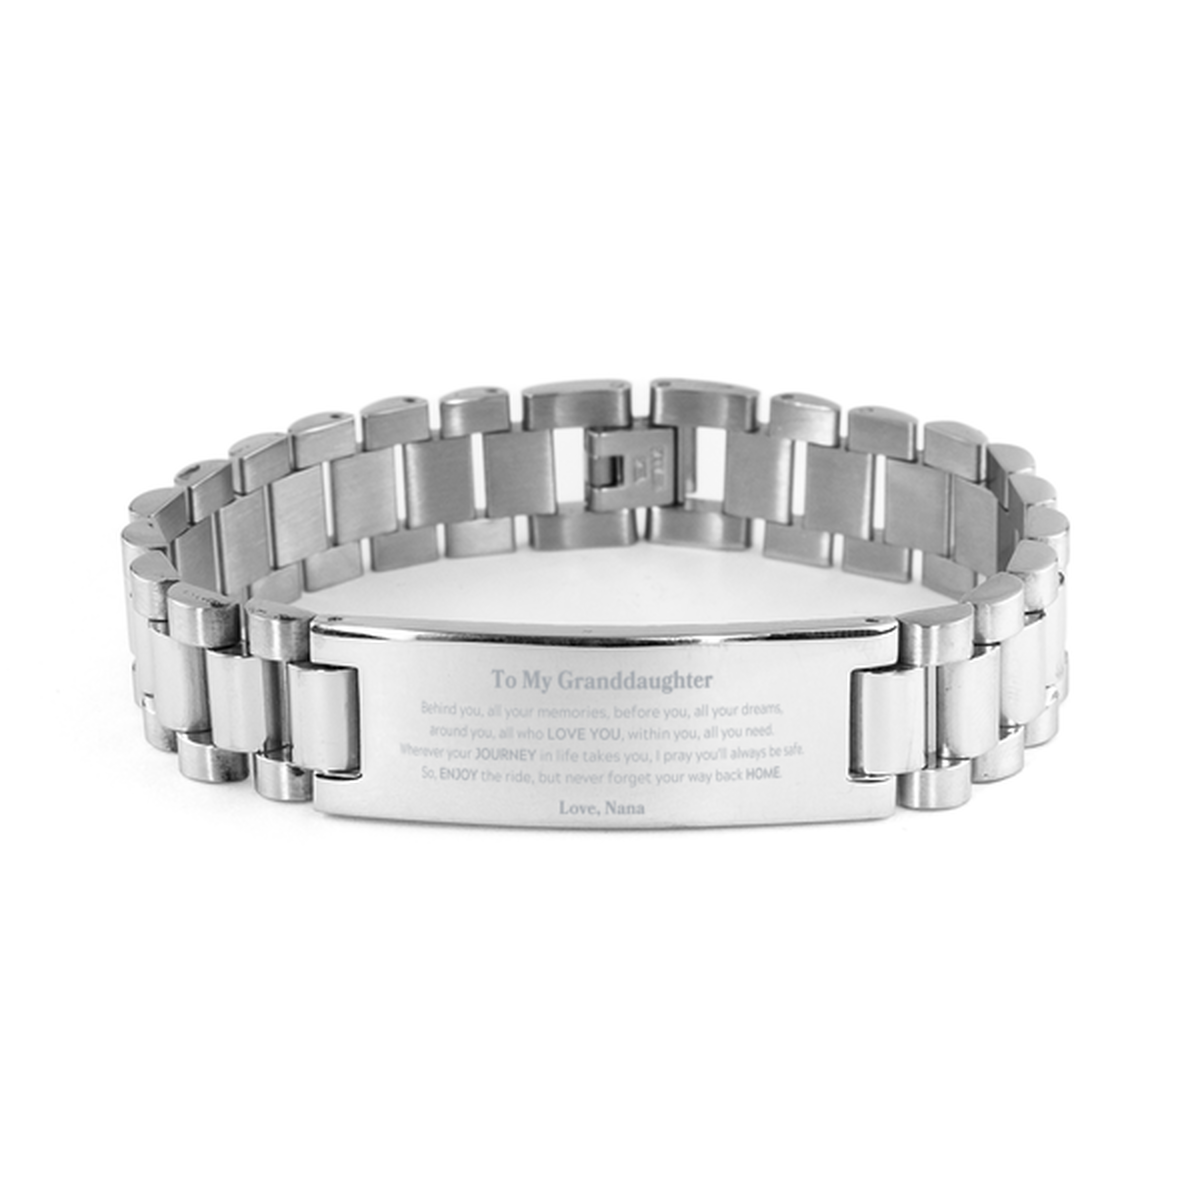 To My Granddaughter Graduation Gifts from Nana, Granddaughter Ladder Stainless Steel Bracelet Christmas Birthday Gifts for Granddaughter Behind you, all your memories, before you, all your dreams. Love, Nana